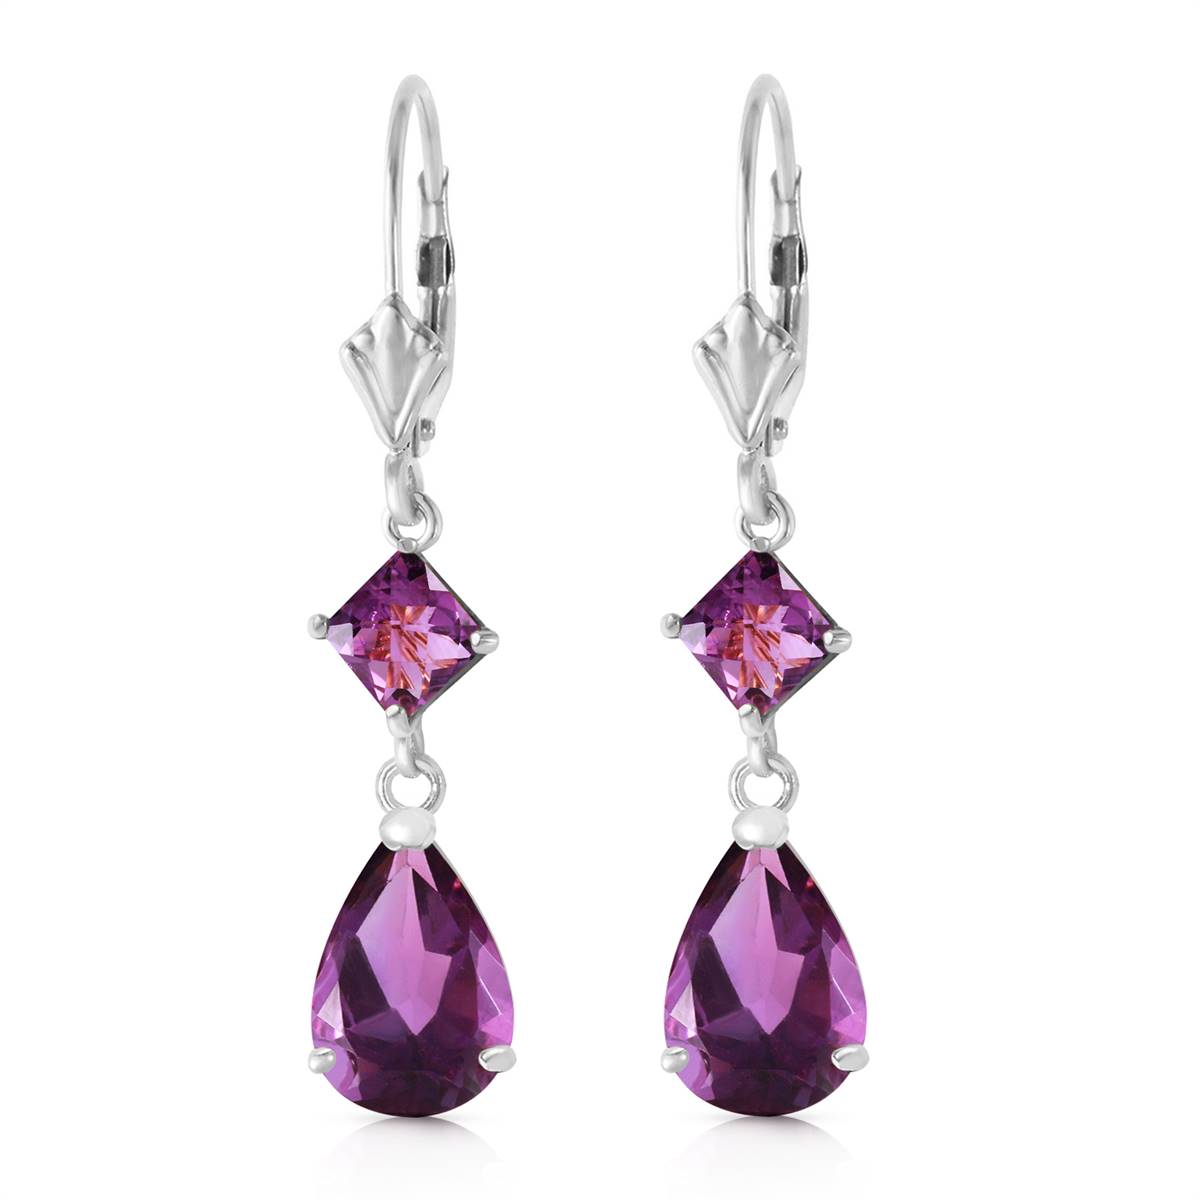 4.5 Carat 14K Solid White Gold Getting Close Amethyst Earrings